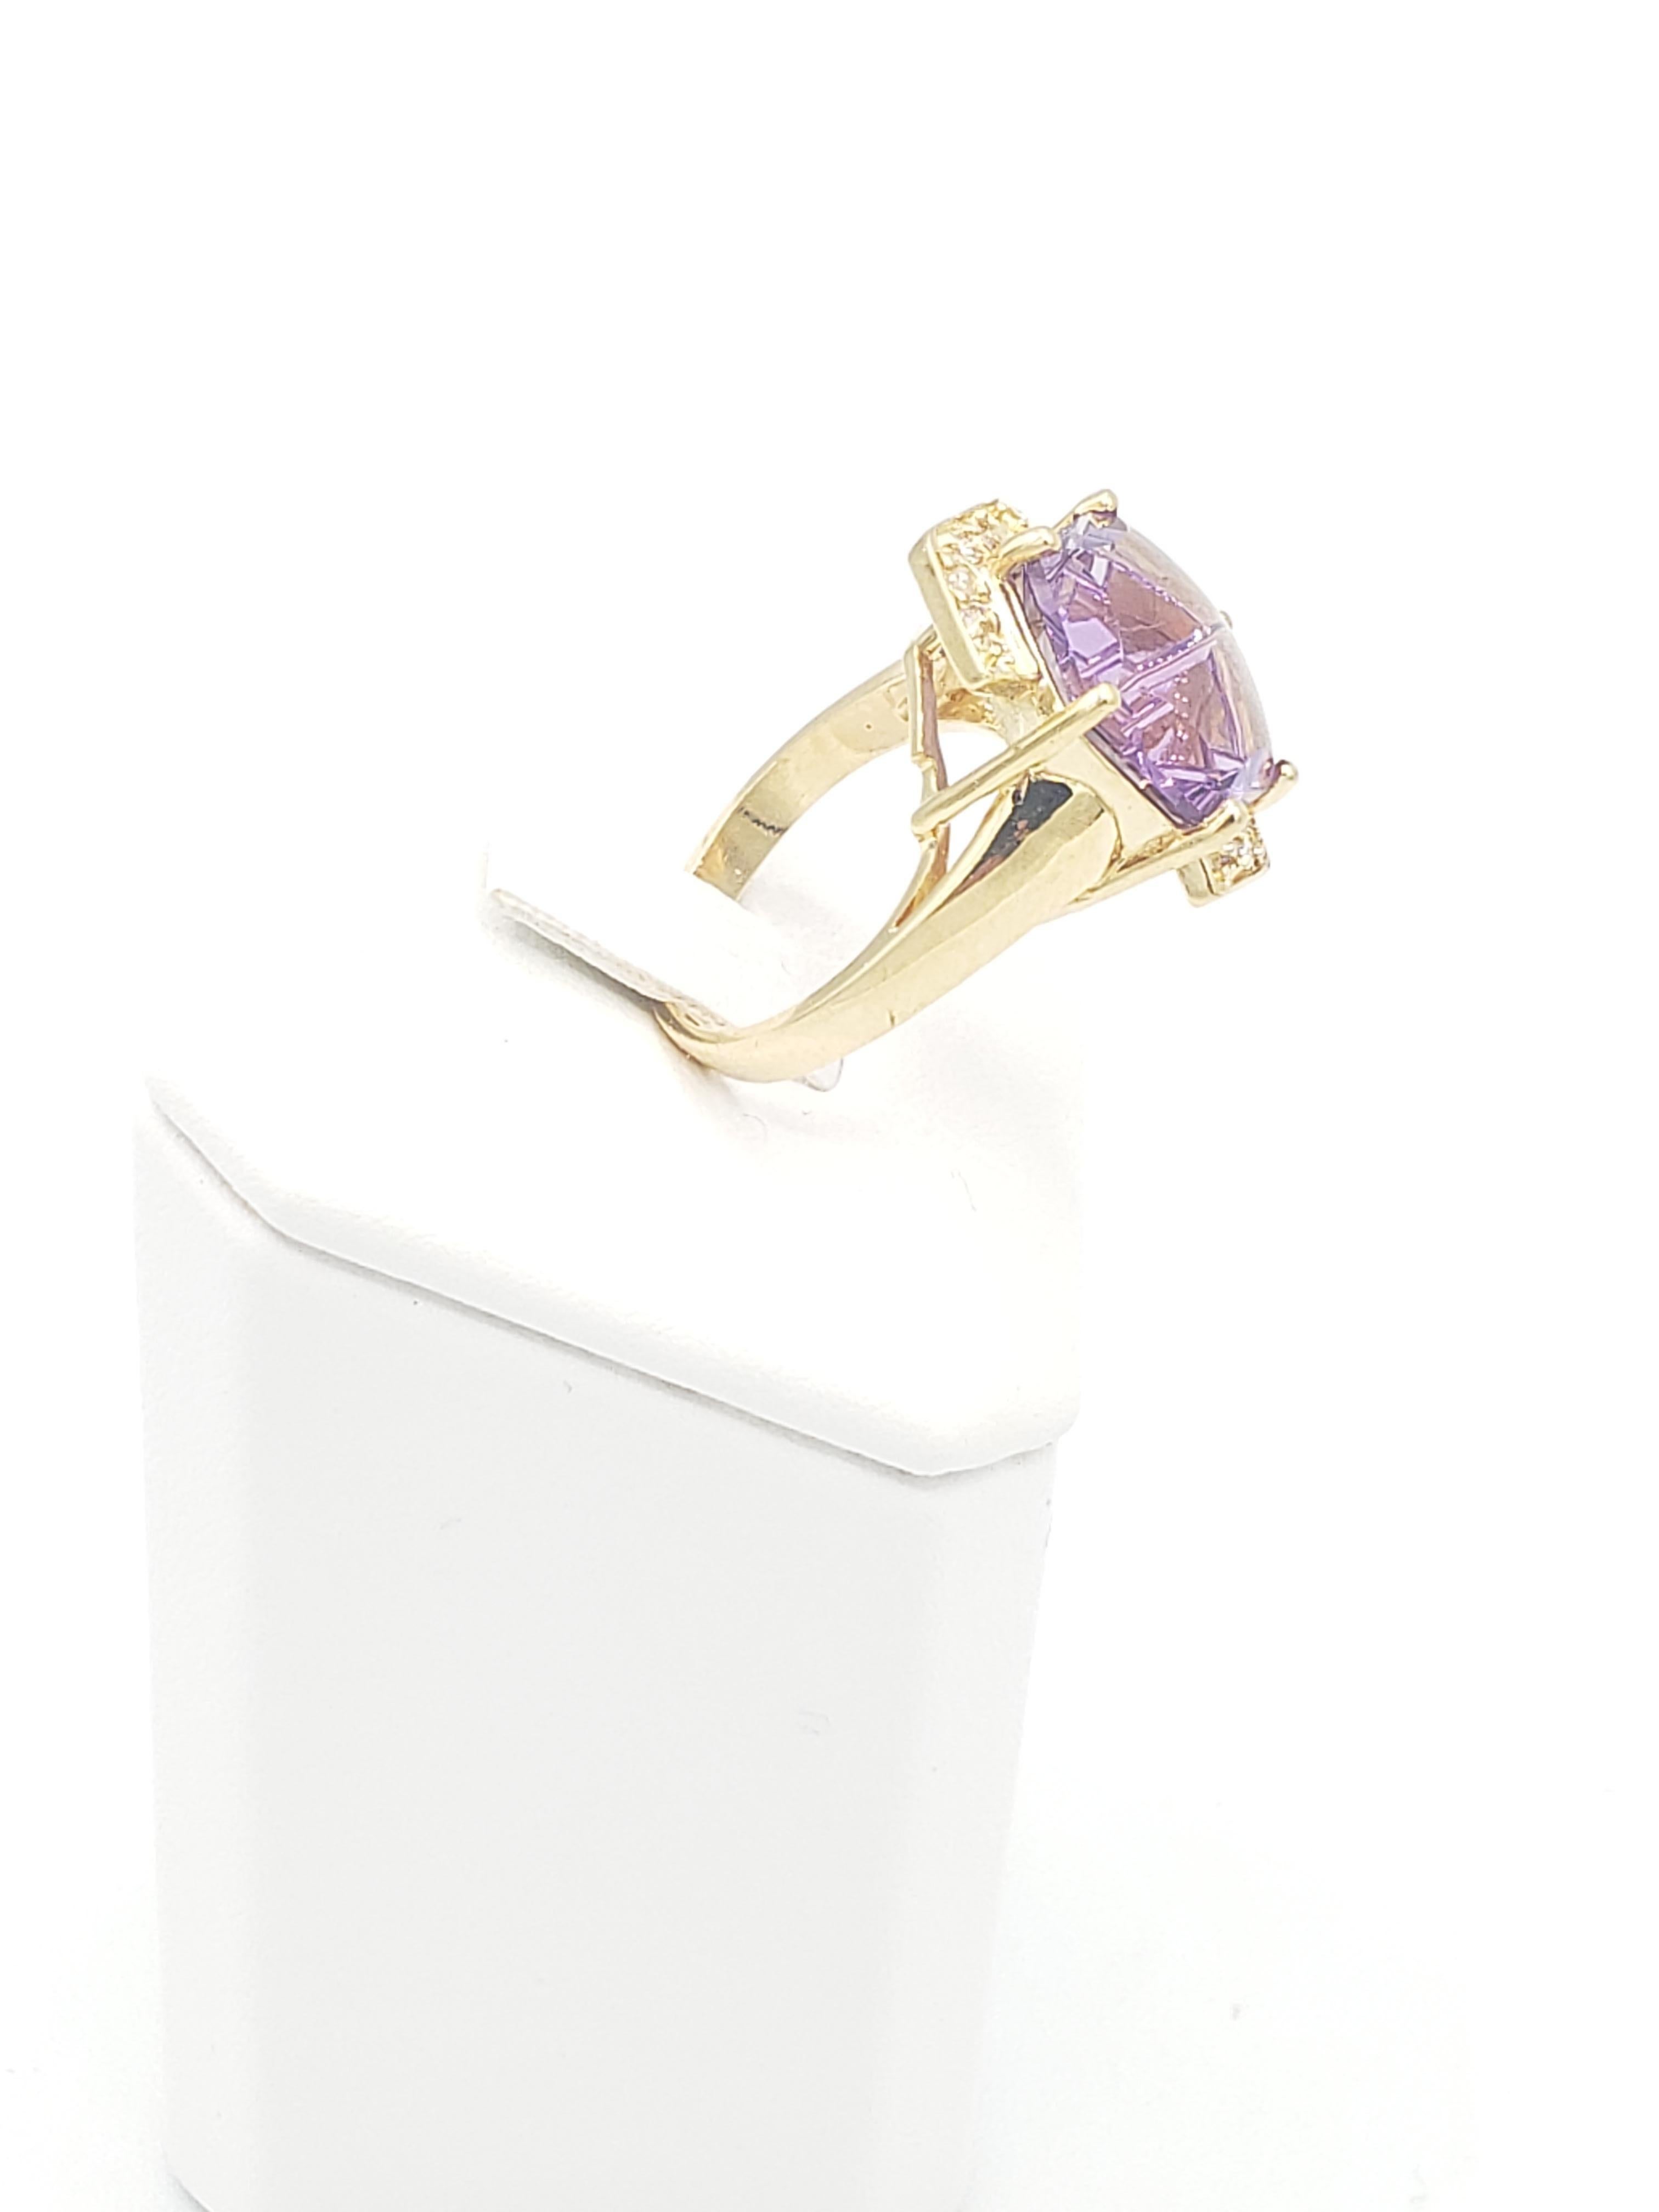 NEW 8 Ct. Natural Amethyst Ring with Diamonds in 14k Solid Yellow Gold  For Sale 3